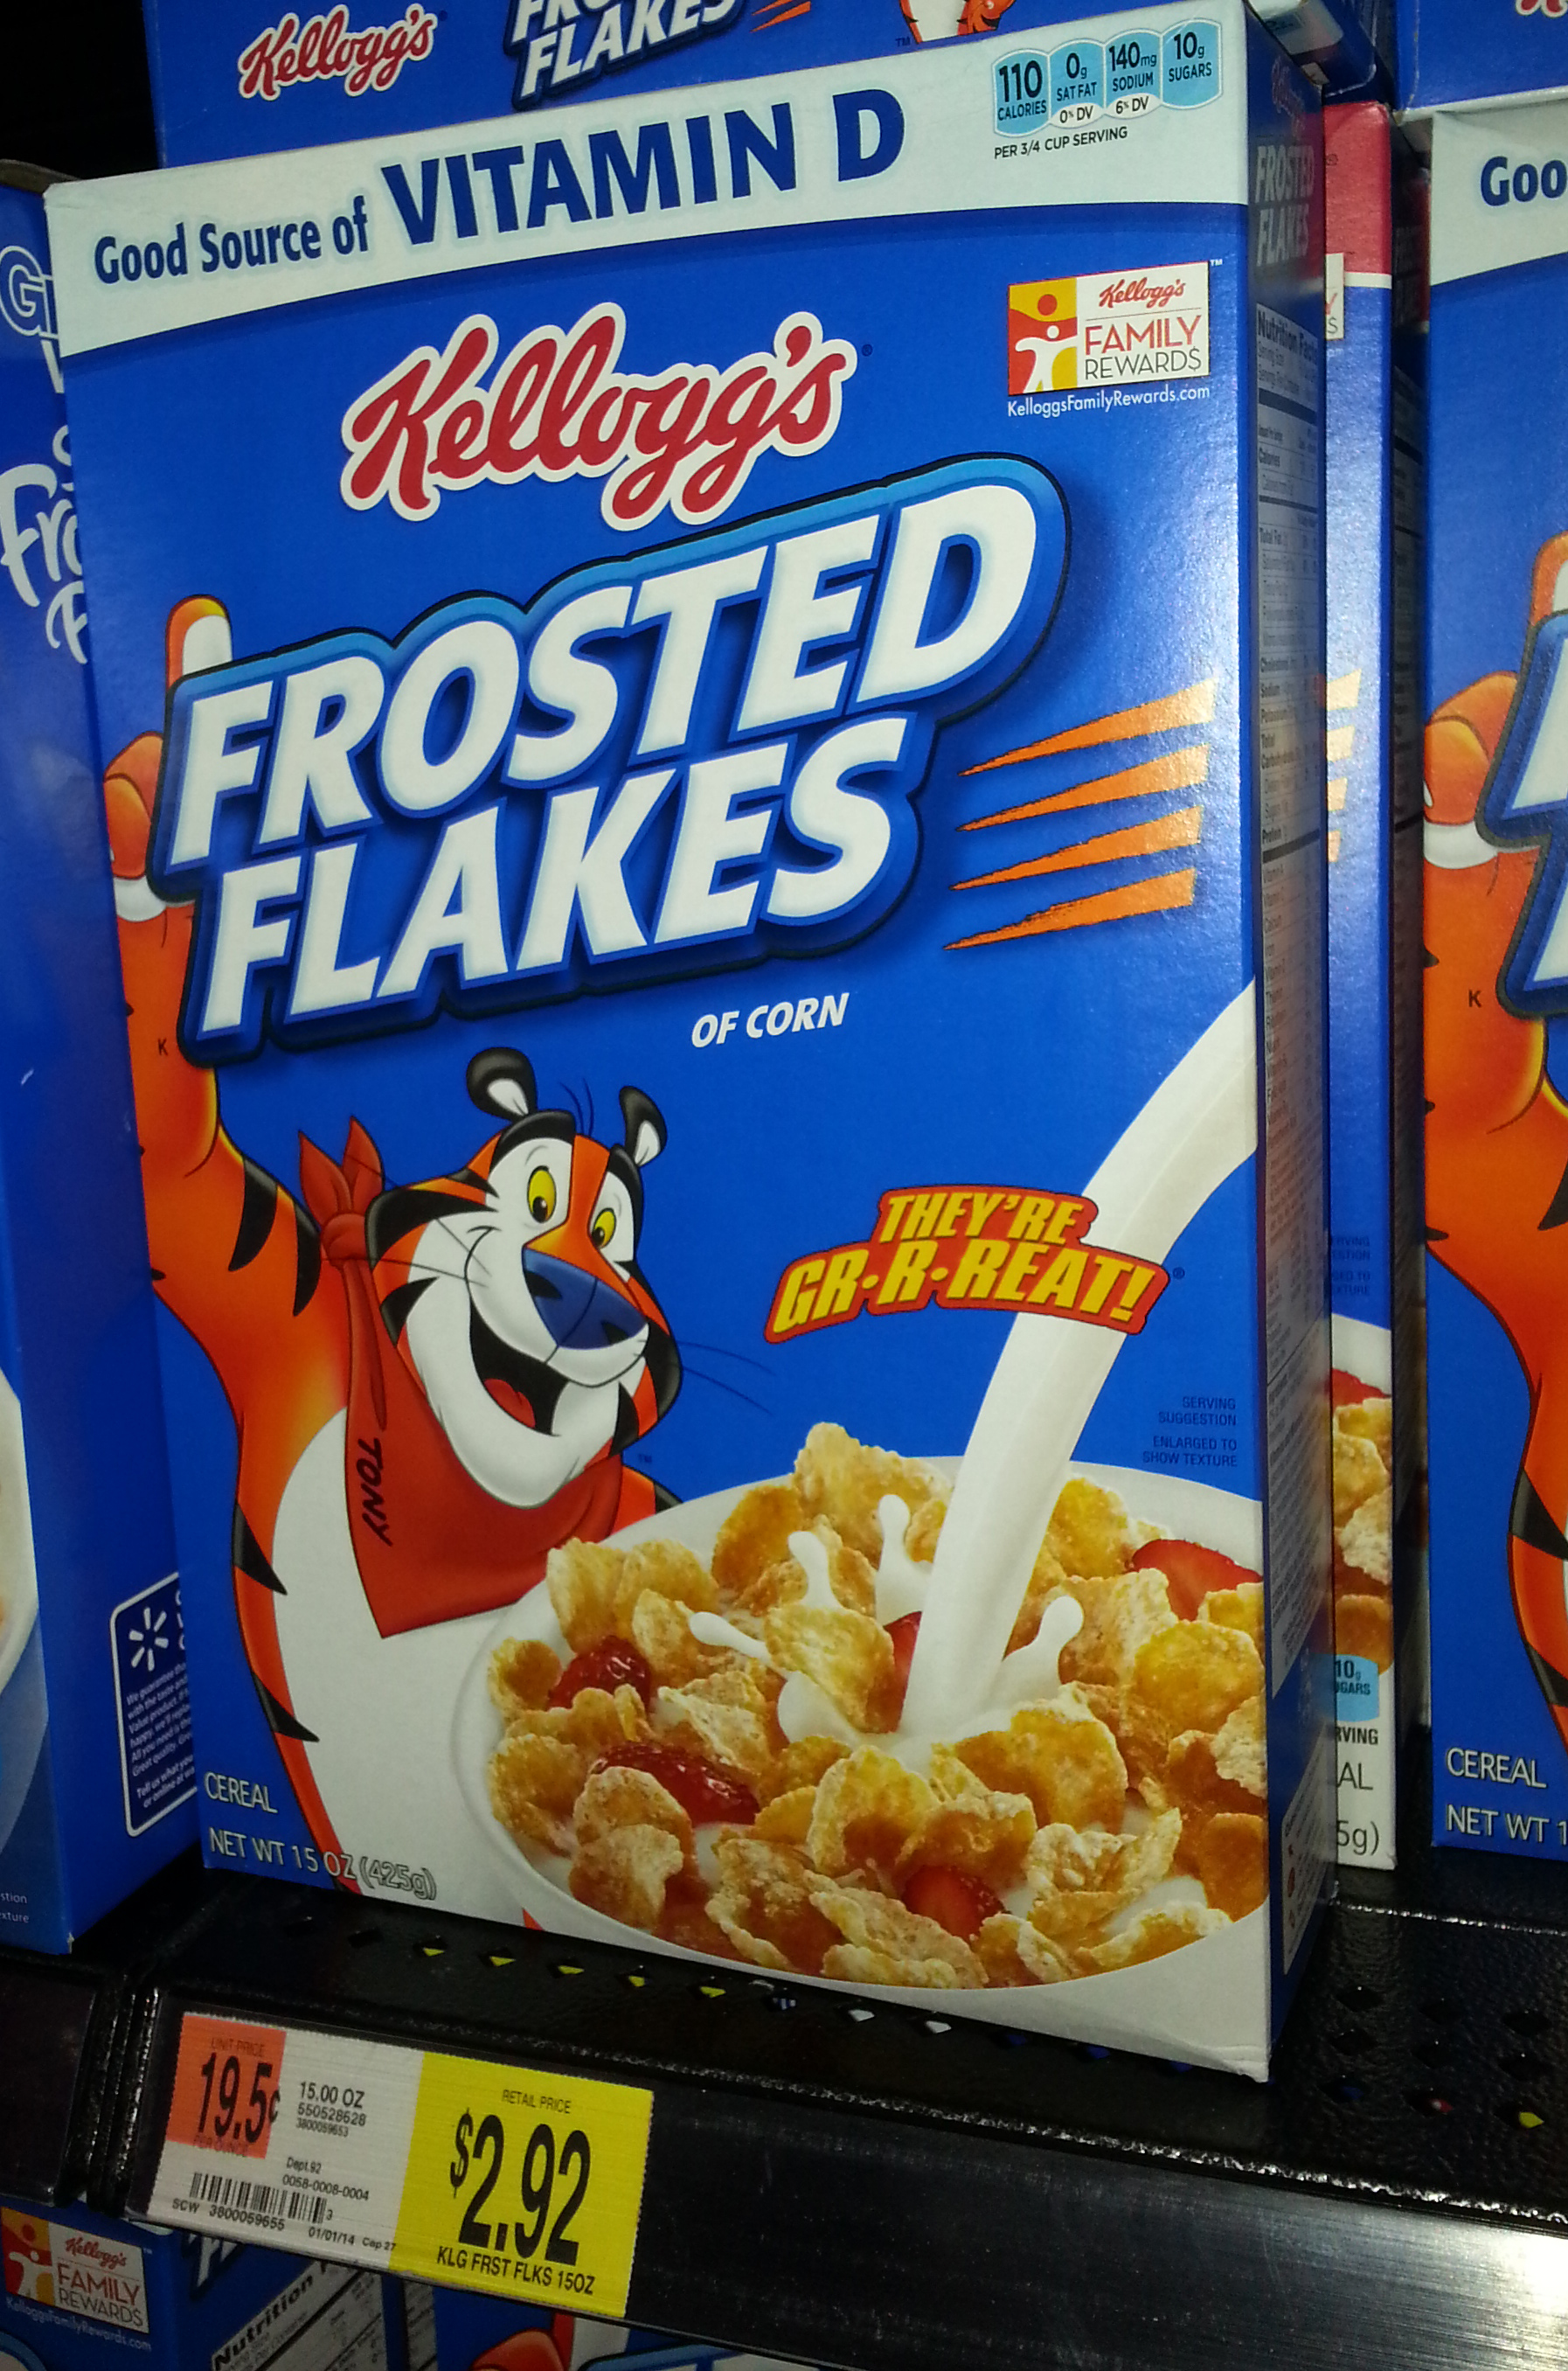 Kellogg's Frosted Flakes Cereal Just $2.42 at Walmart!